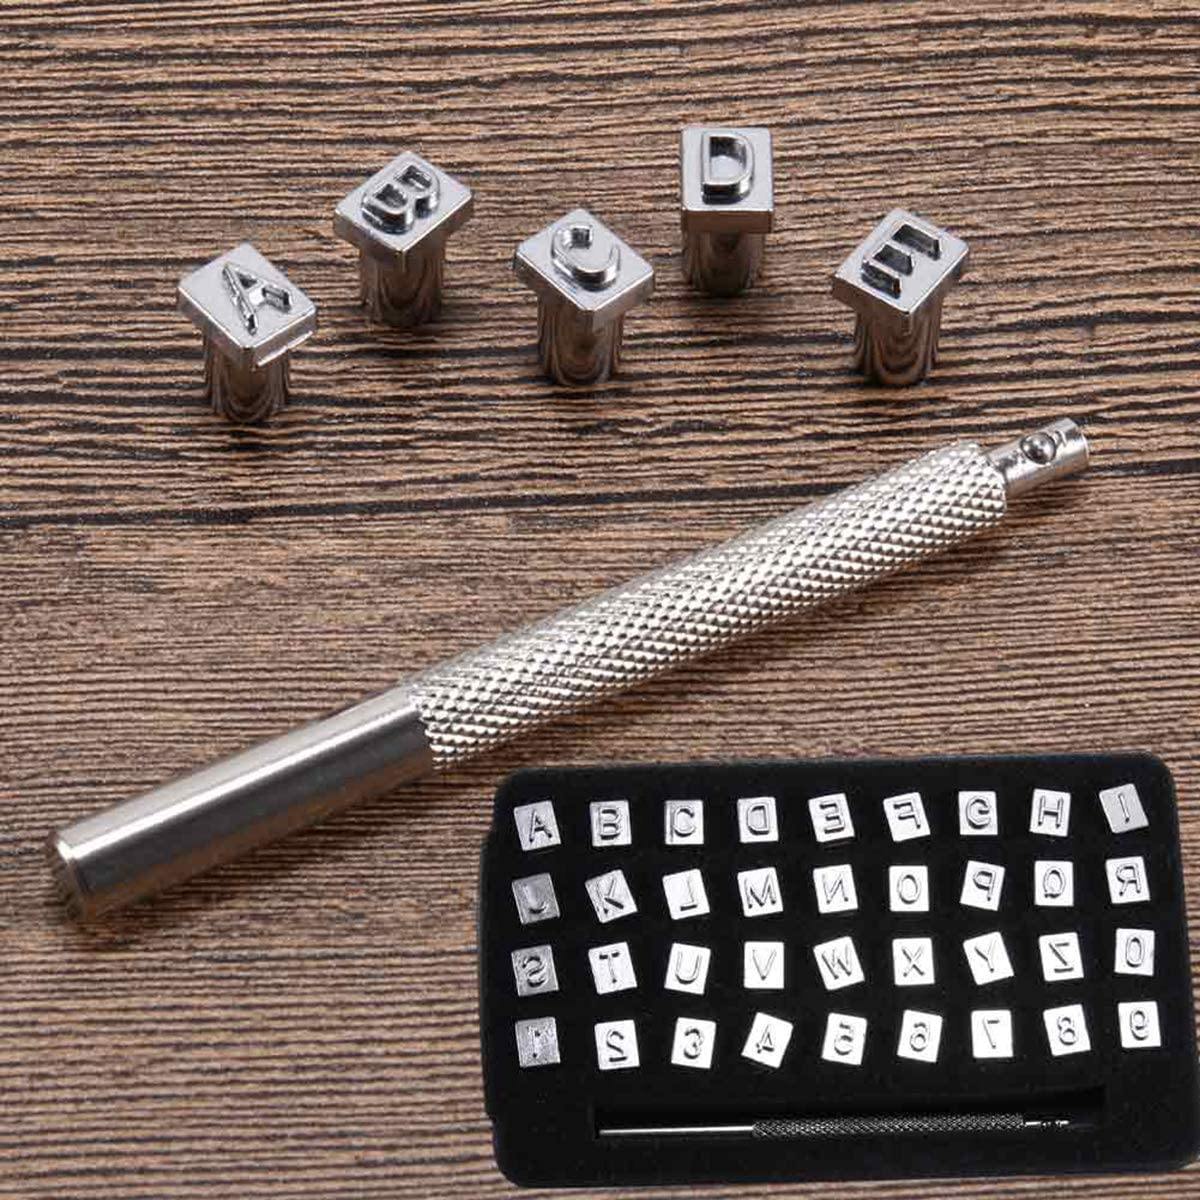 50 Pieces Letters and Numbers Stamp Set 6mm Alphabet Leather Punch Metal Floral Pattern Stamp Tools with Handle, Silver